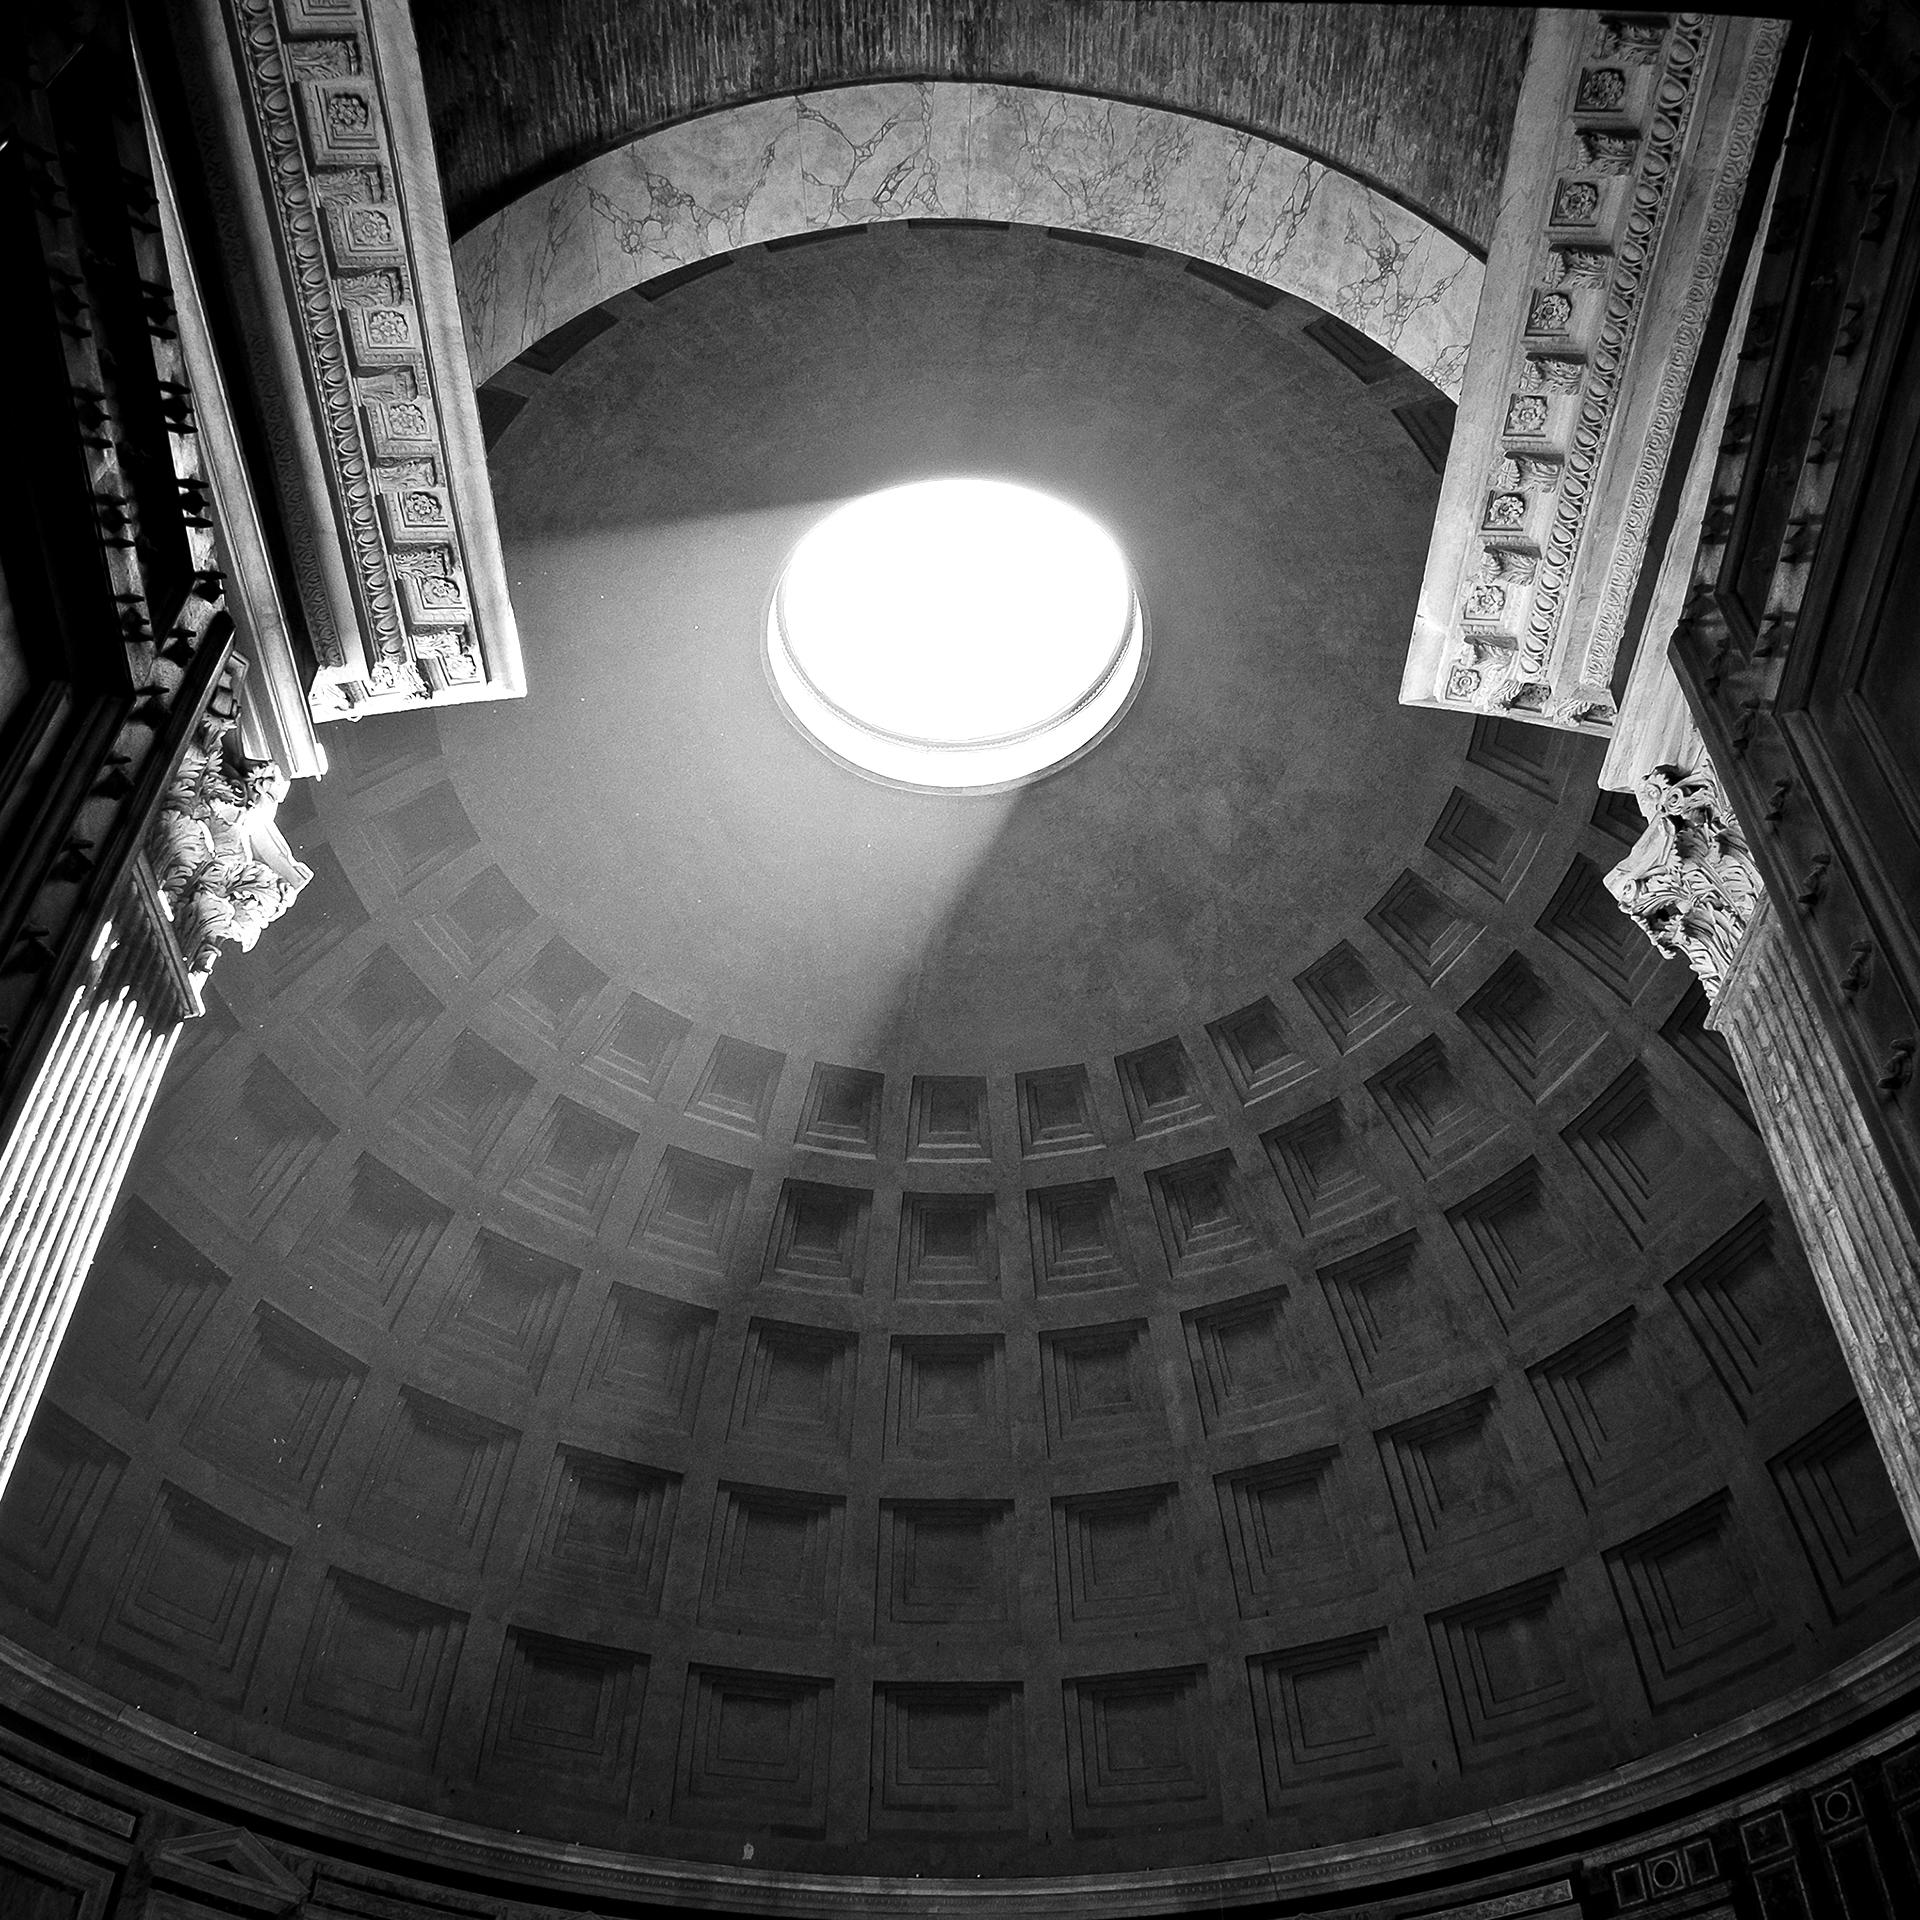 PANTHEON #01 - collection: "Armony and Perfection" - Alberto Desirò
A sanctuary for all Gods, each equal to the other, of equal importance.
A temple shaped like the Earth and the stars sphere.
Like the Earth where all seeds of the eternal fire are